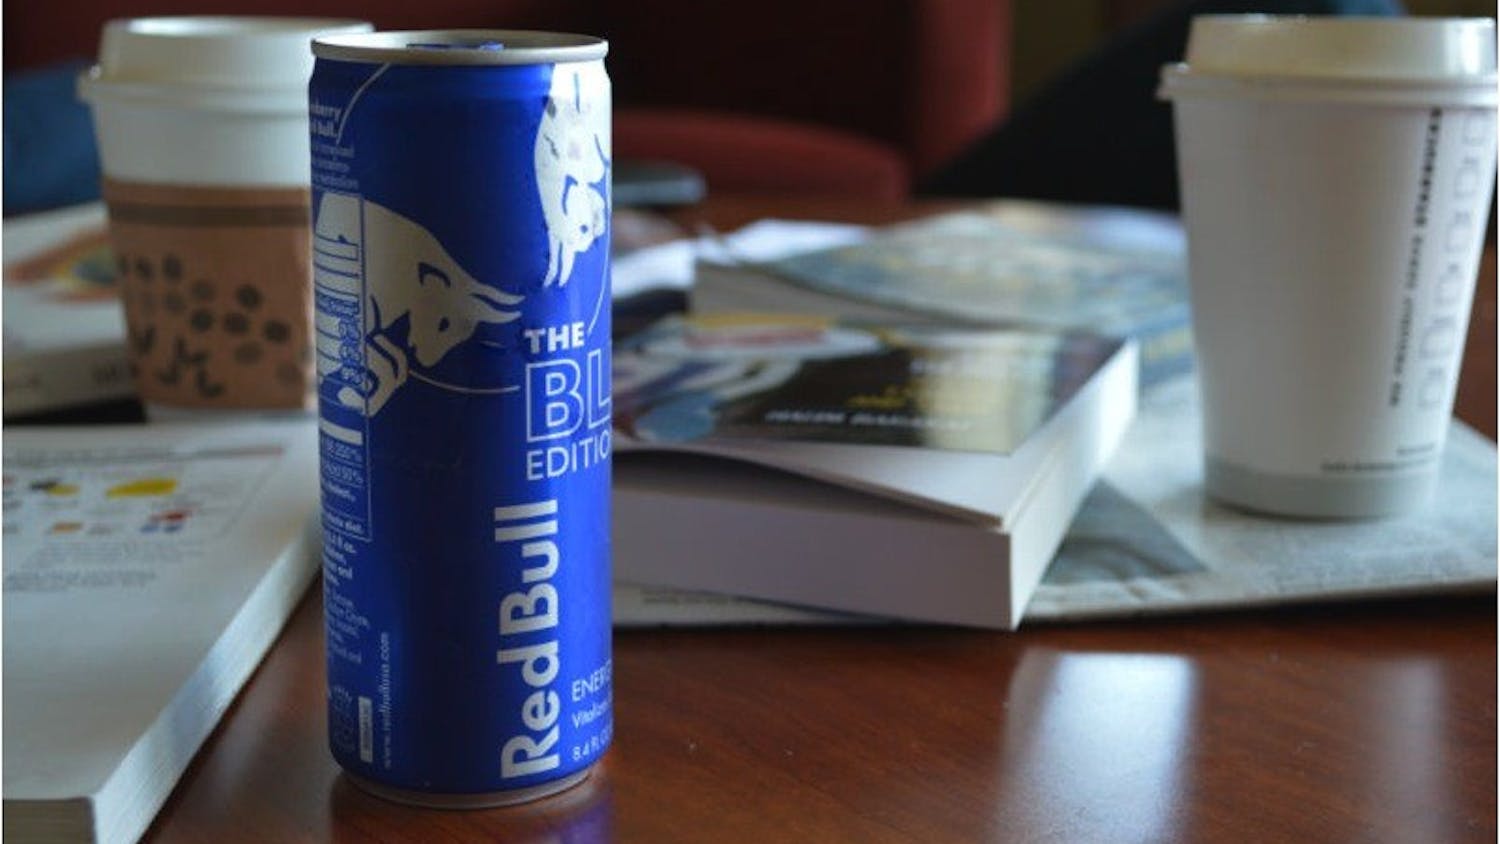 	College students regularly consume large amounts of caffeine daily.